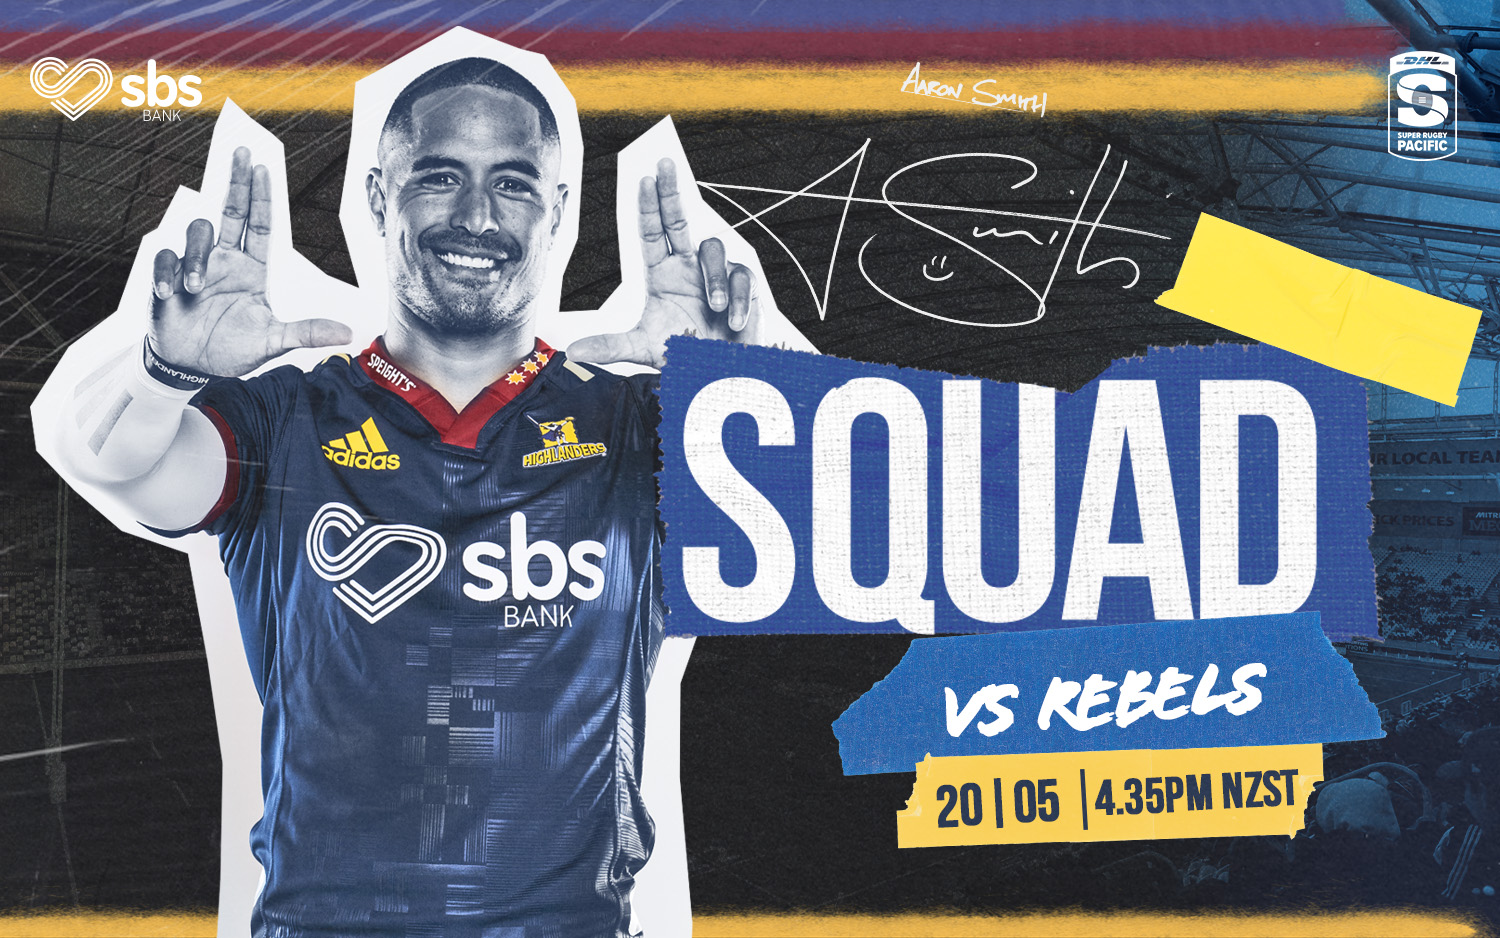 Highlanders to play Rebels in must-win Dunedin clash | Highlanders Rugby Club Limited Partnership